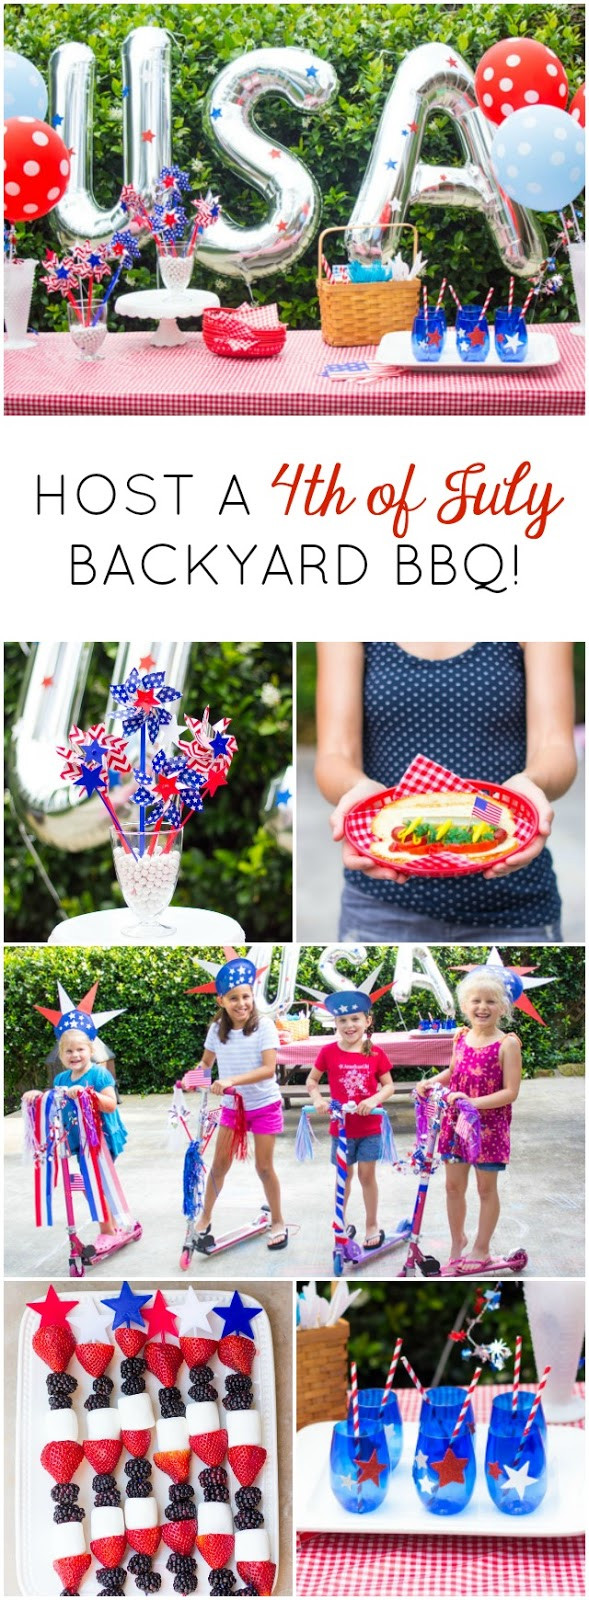 4Th Of July Backyard Party Ideas
 Host a 4th of July Party 7 Simple Ideas to Try Design